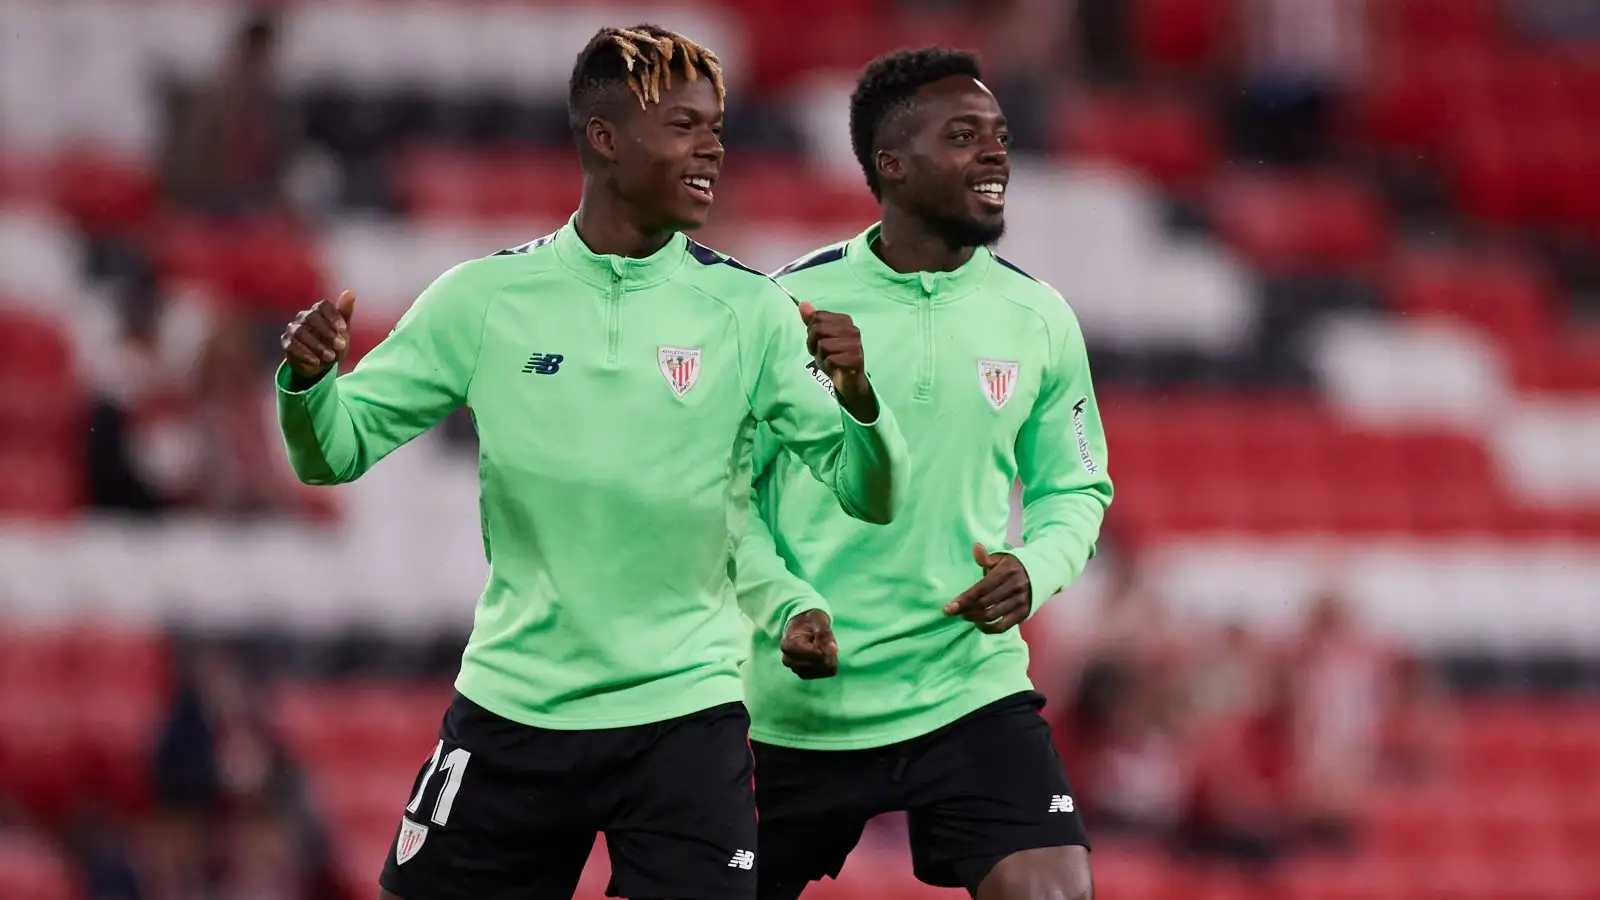 Aston Villa-linked Bilbao winger Nico Williams and his brother Inaki Williams during a warm-up.